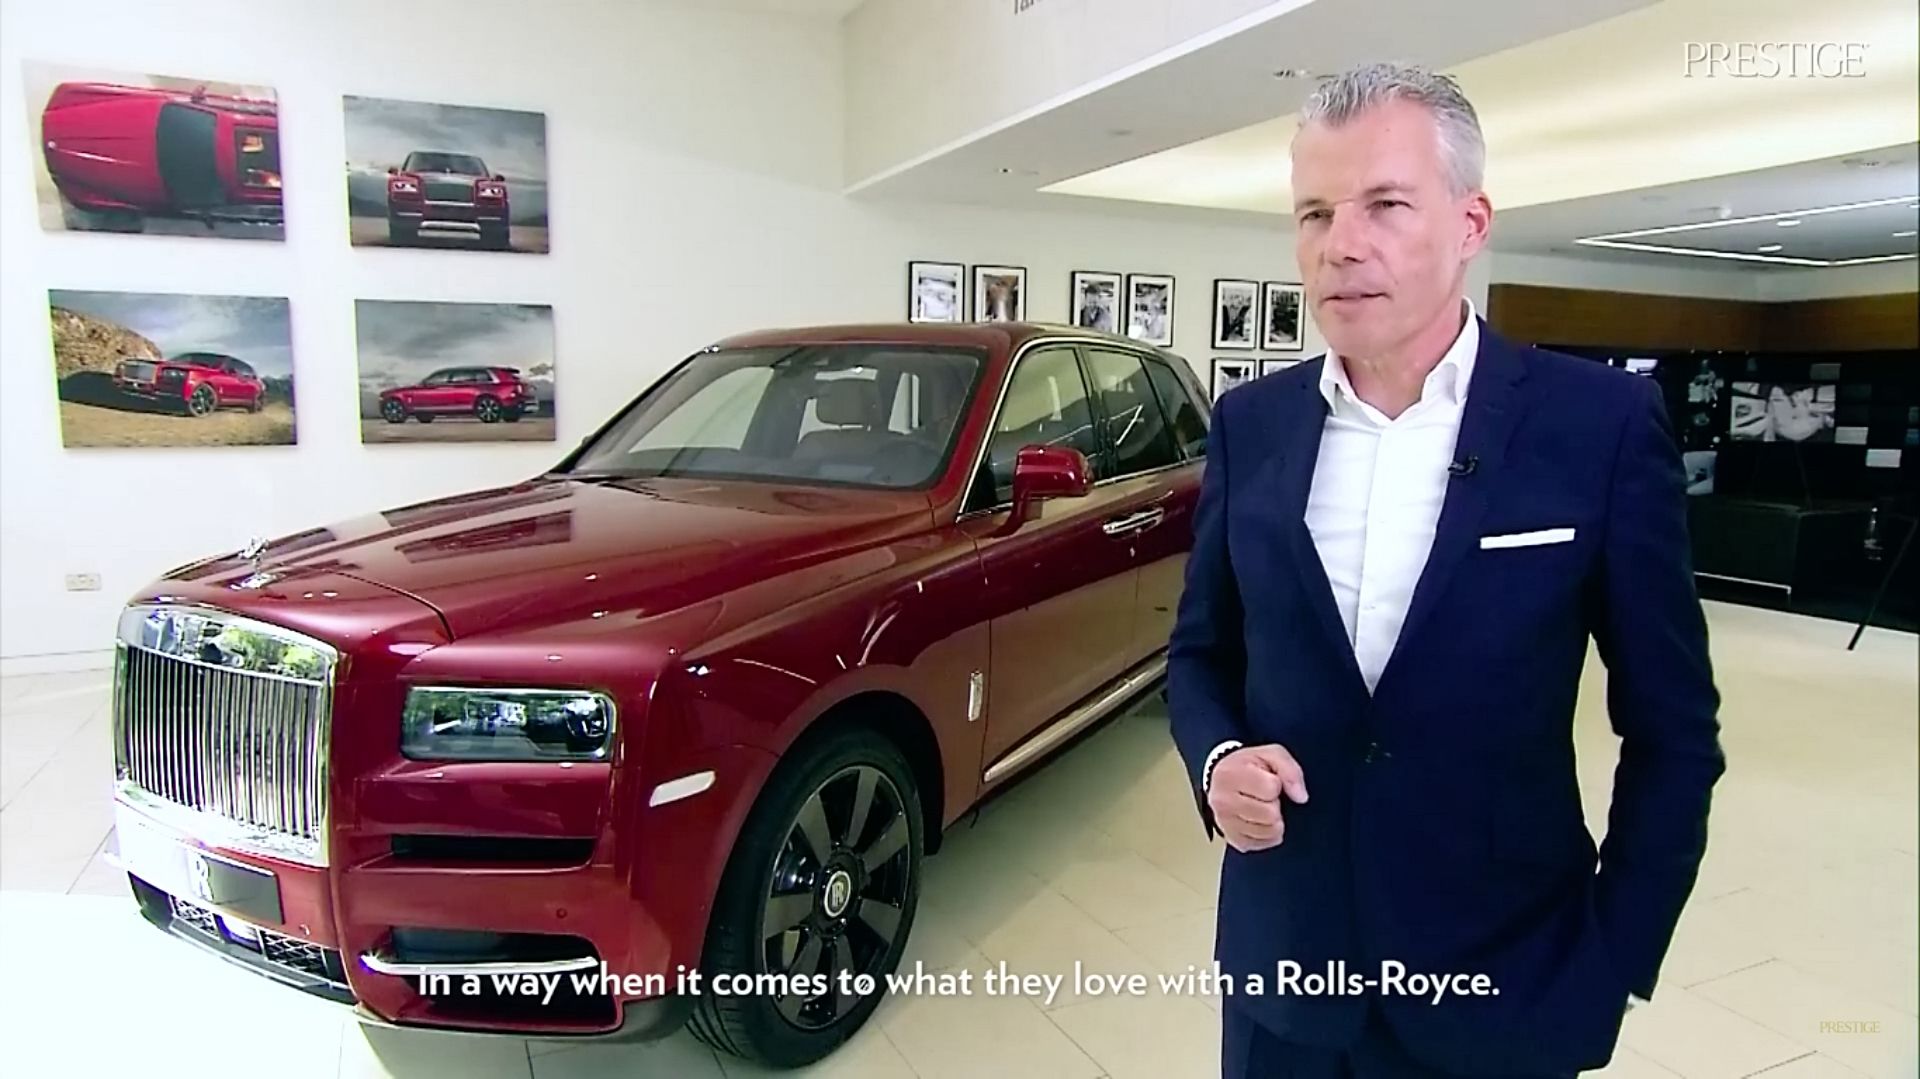 VIDEO: Rolls-Royce Cullinan And What It Means For Asia